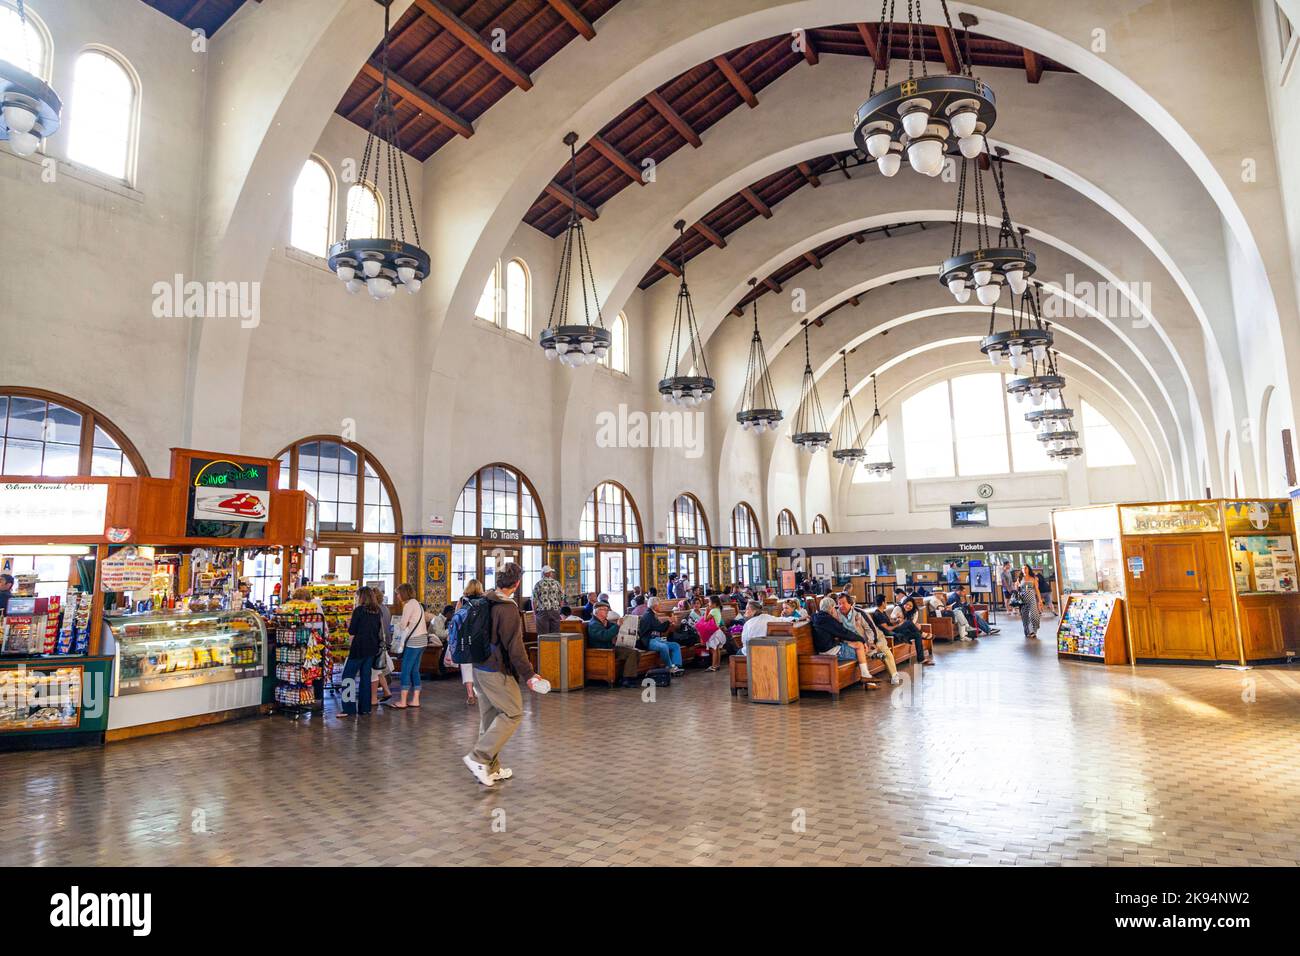 SAN DIEGO, USA - JUNE 11: people wait for the trains inside Union Station on June 11, 2012 in San Diego, USA. The Spanish Colonial Revival style stati Stock Photo